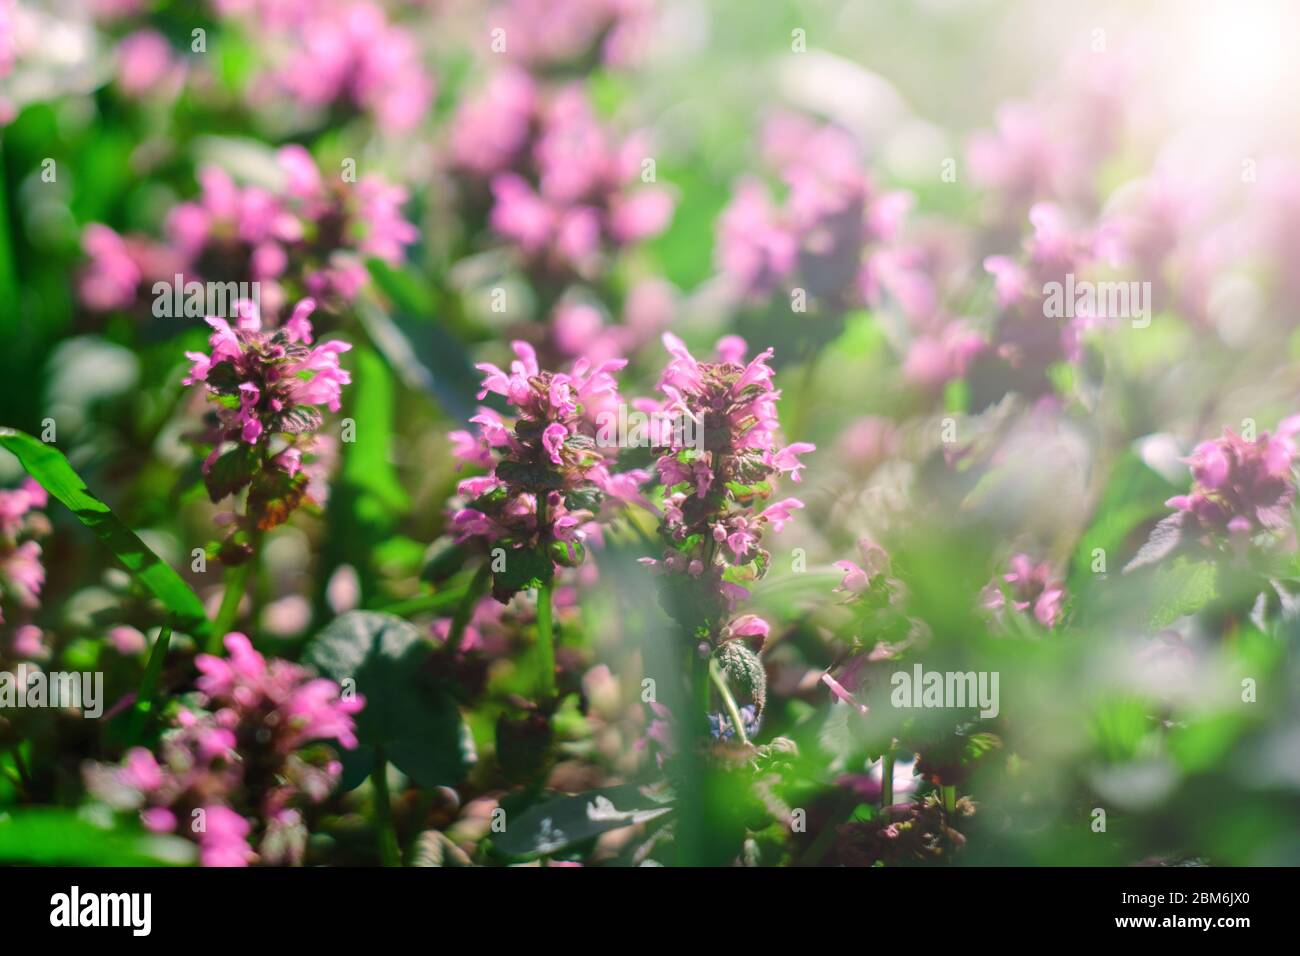 Thyme in the rays of the day sun. Thyme is a genus of the family Lamiaceae. Stock Photo